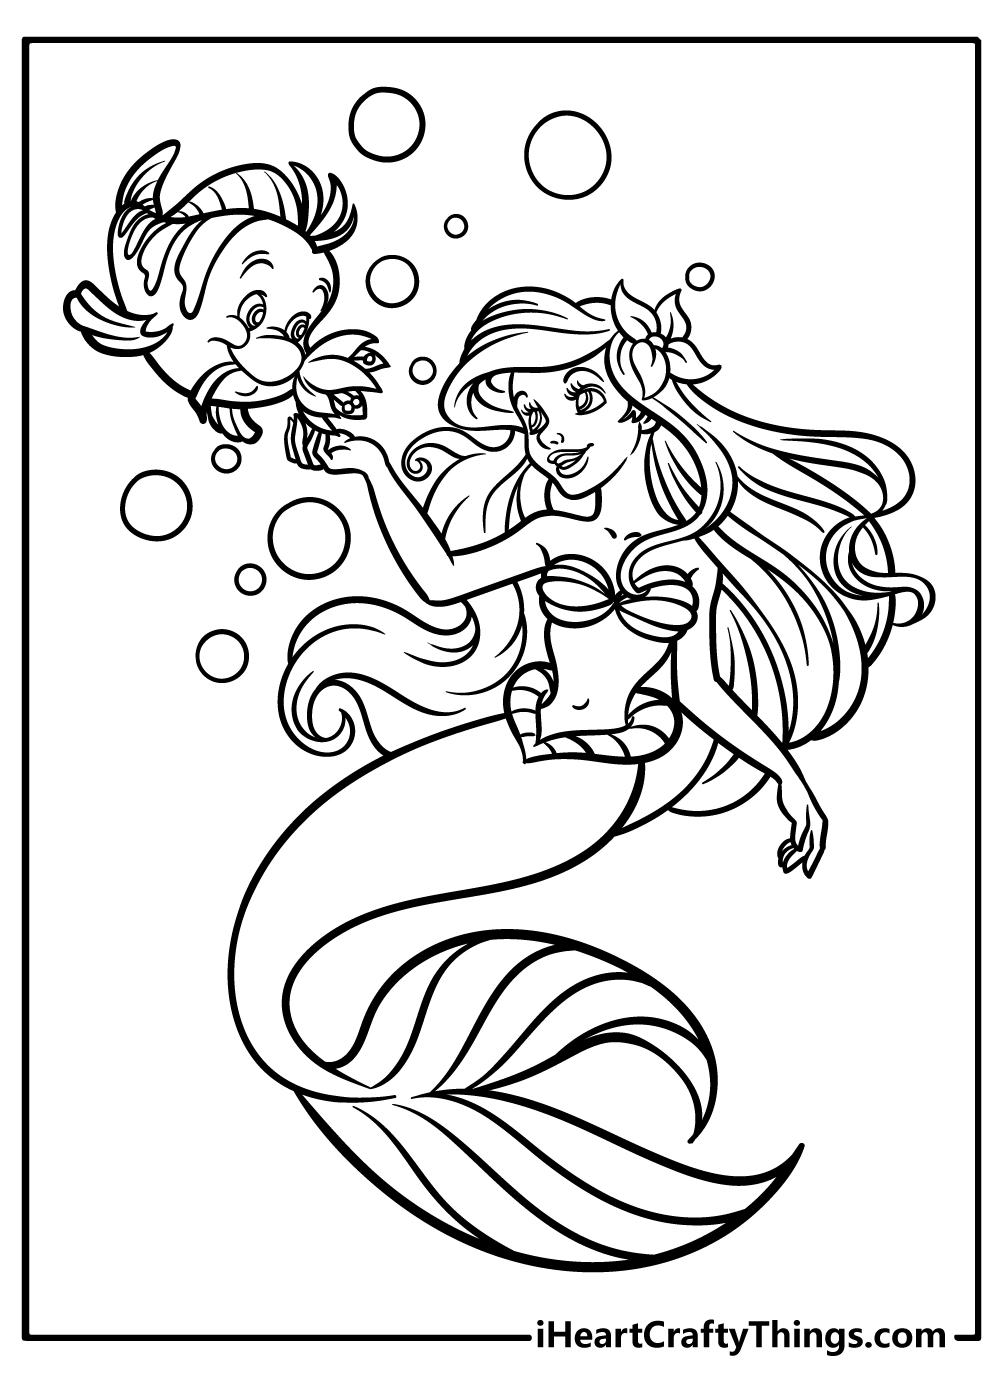 Ariel Coloring Pages for preschoolers free